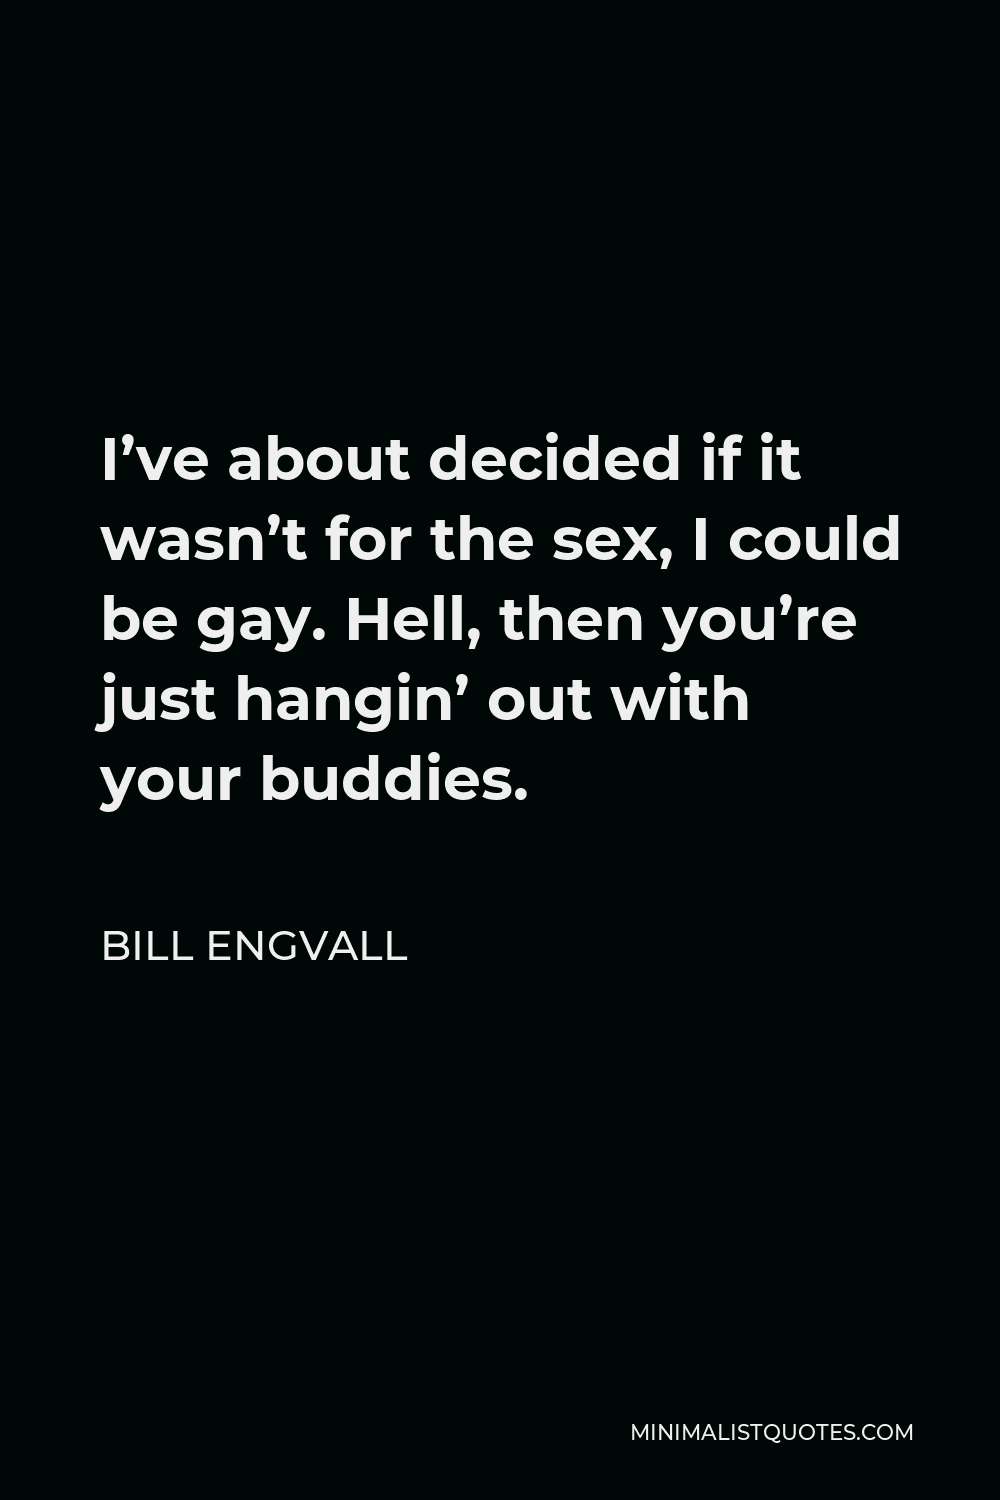 Bill Engvall Quote - I’ve about decided if it wasn’t for the sex, I could be gay. Hell, then you’re just hangin’ out with your buddies.